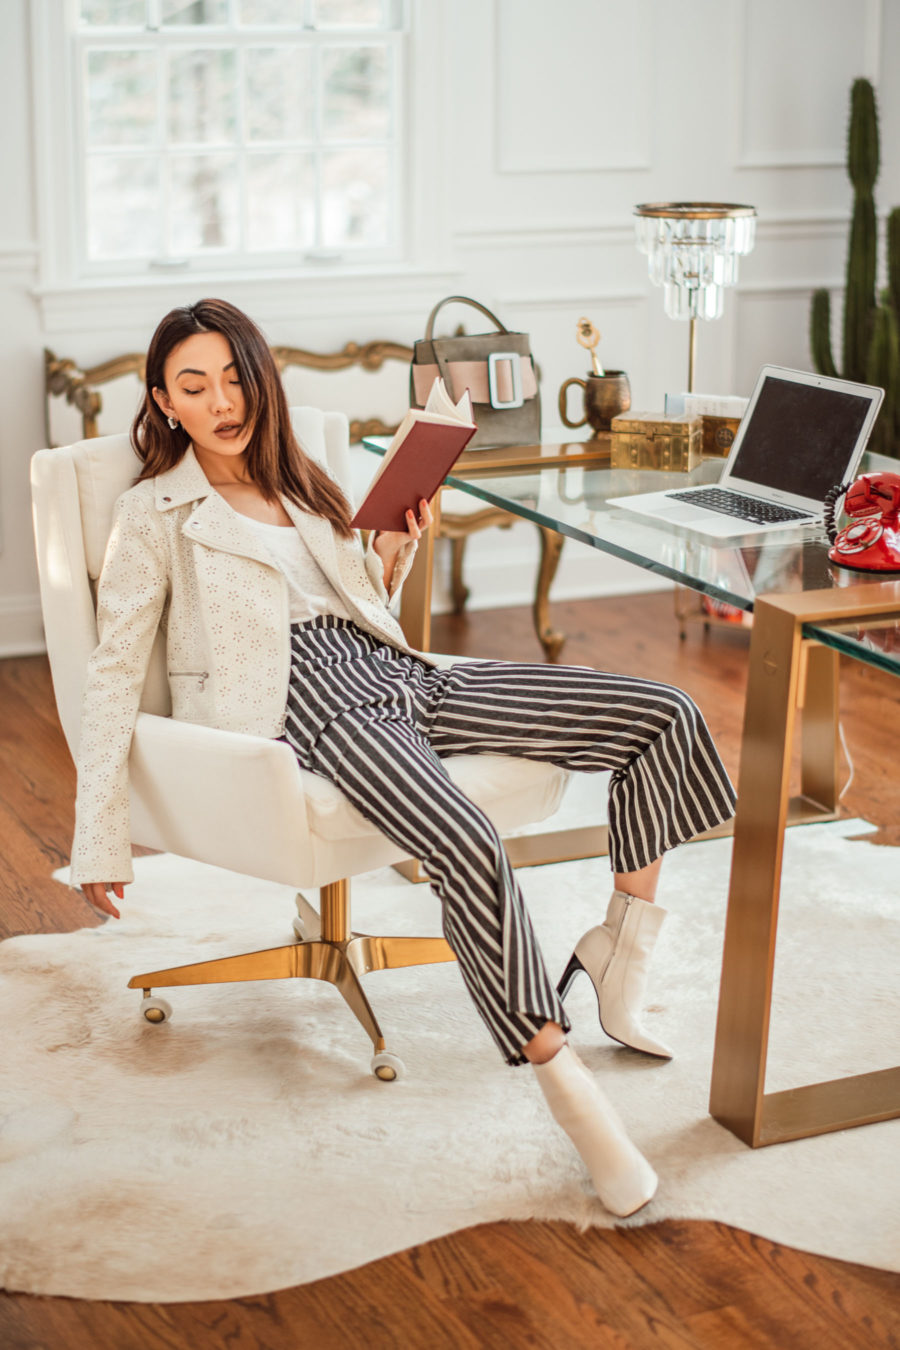 fashion blogger jessica wang at her home office sharing office stationary must-haves // Jessica Wang - Notjessfashion.com